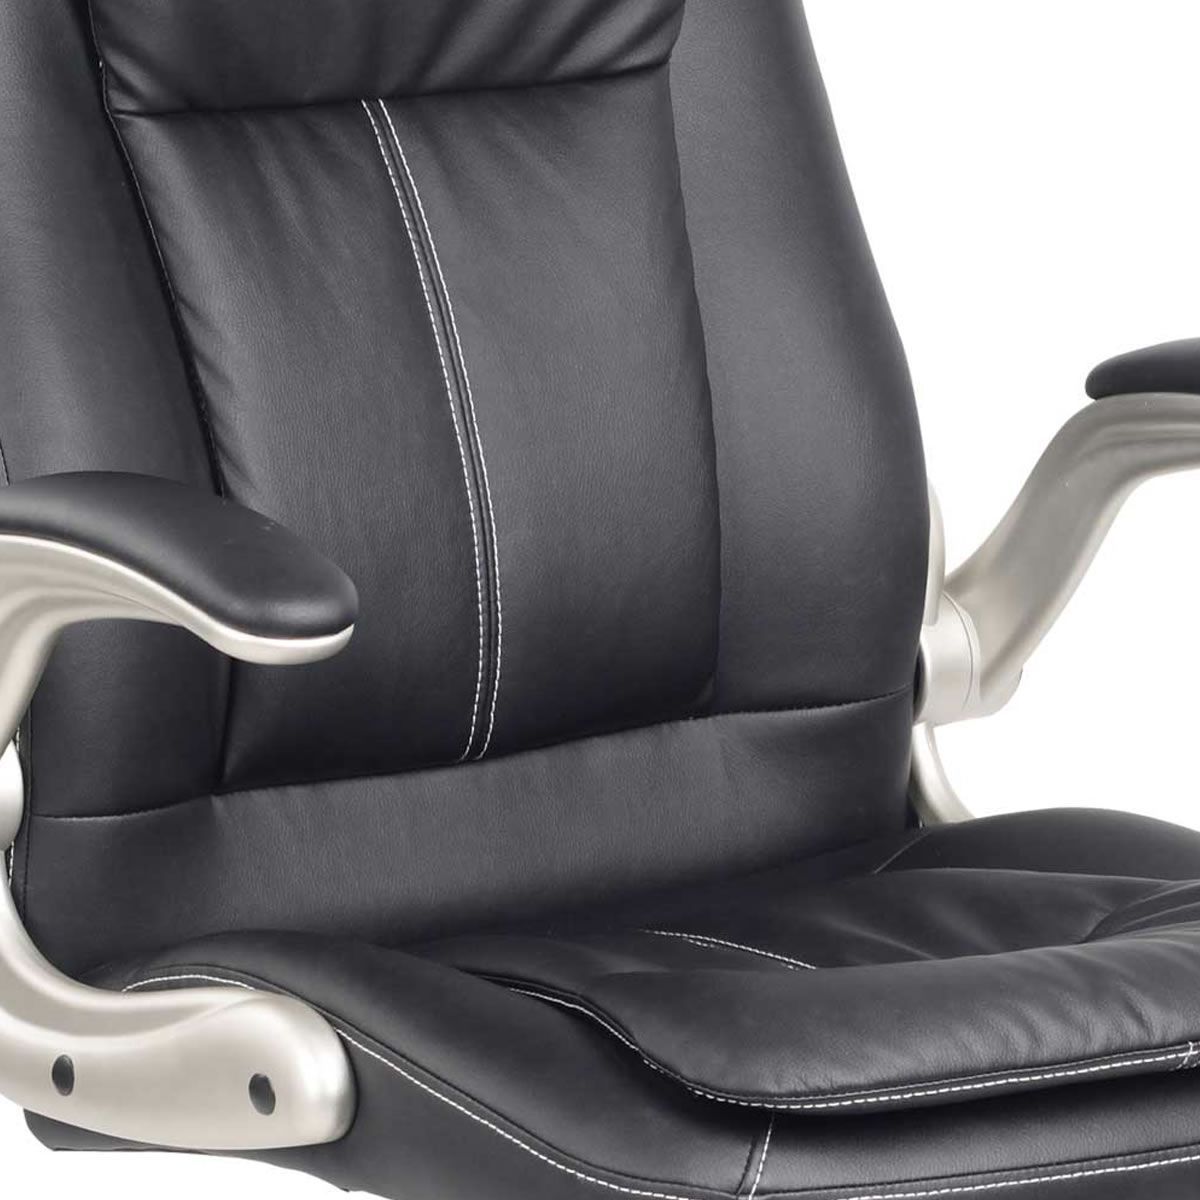 Executive PU Leather Office Computer Chair - Black | Crazy Sales